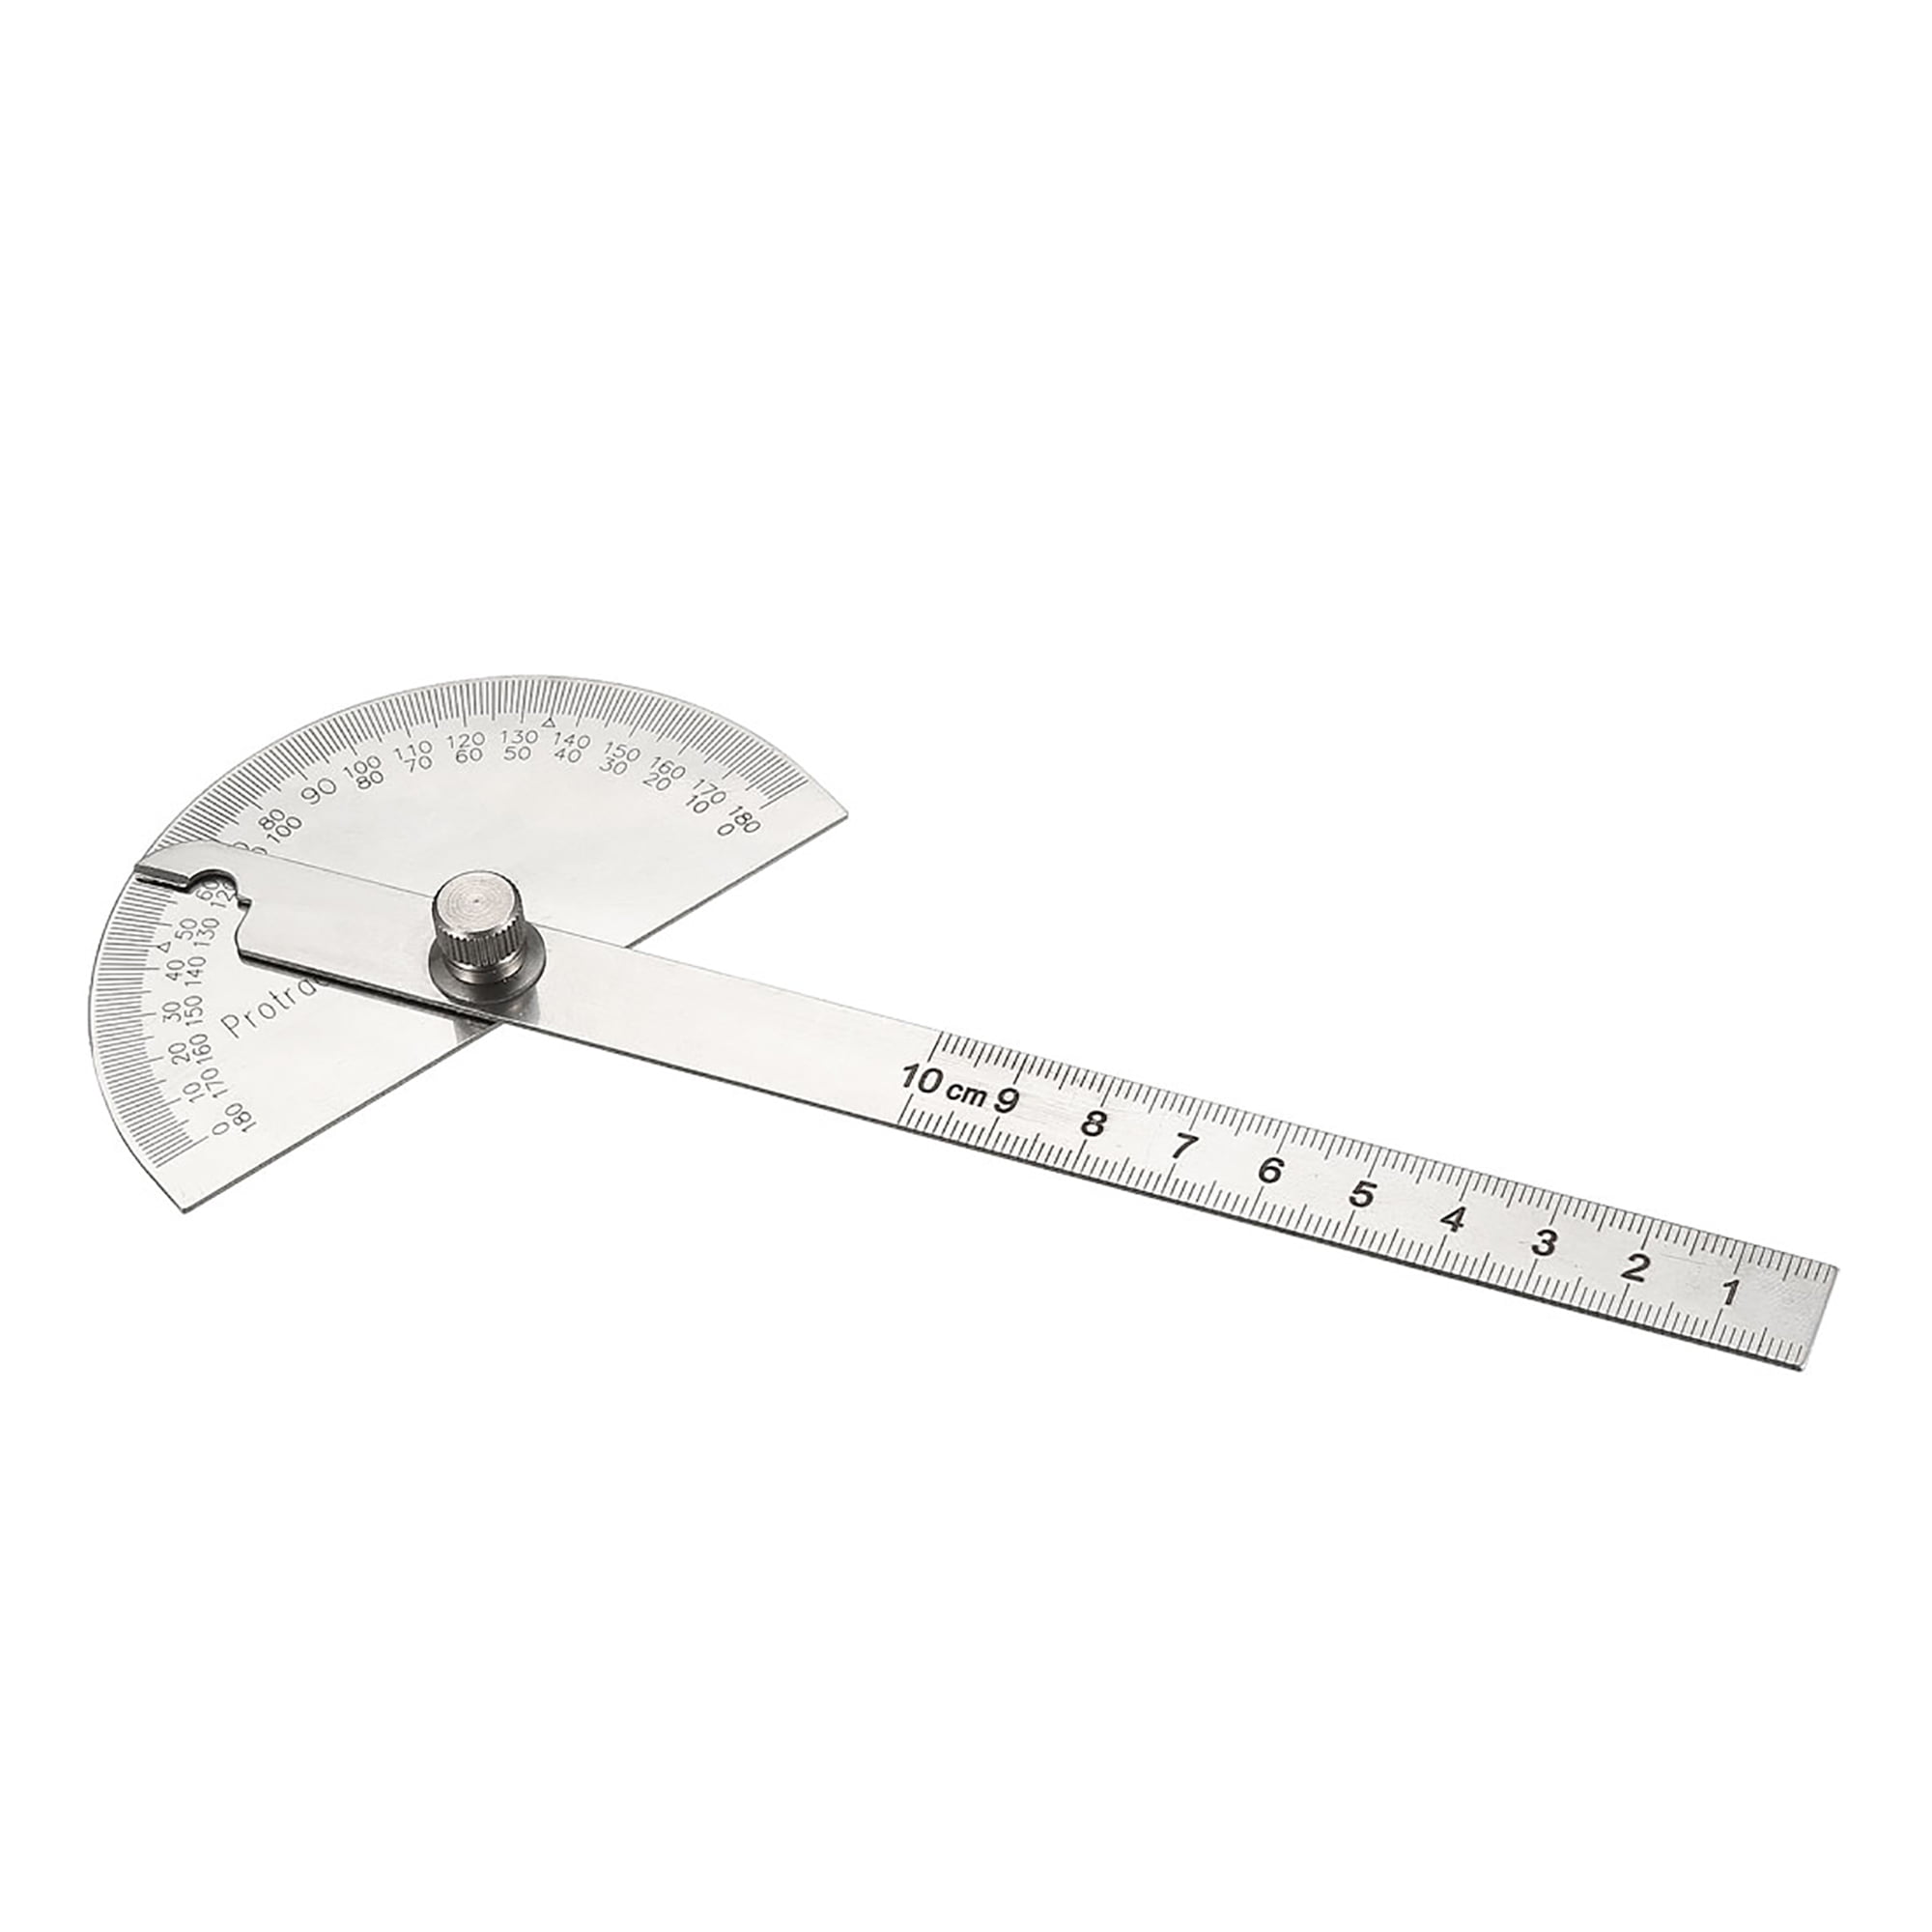 0-180 Degrees Moving Arm Angle Ruler ISO Accuracy Stainless Steel Protractor Round Head Double Arms with Inch/Centimeter/Millimeter Scales 